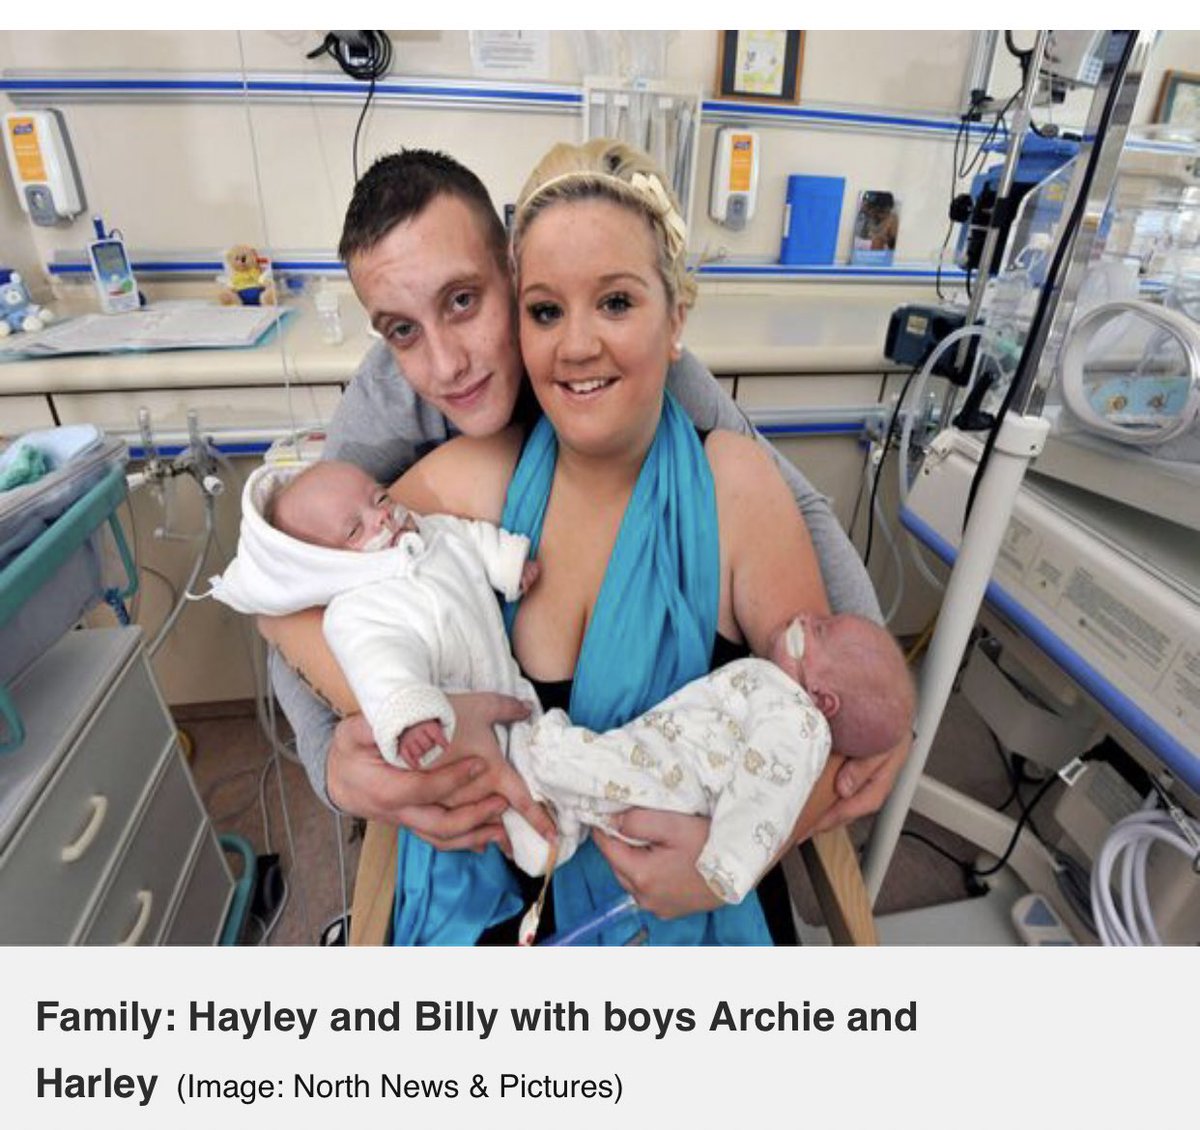 These twin boys, Archie and Harley, were born at 22 and a half weeks.  https://www.mirror.co.uk/news/real-life-stories/archie-and-harley-garthwaite-most-premature-1373764